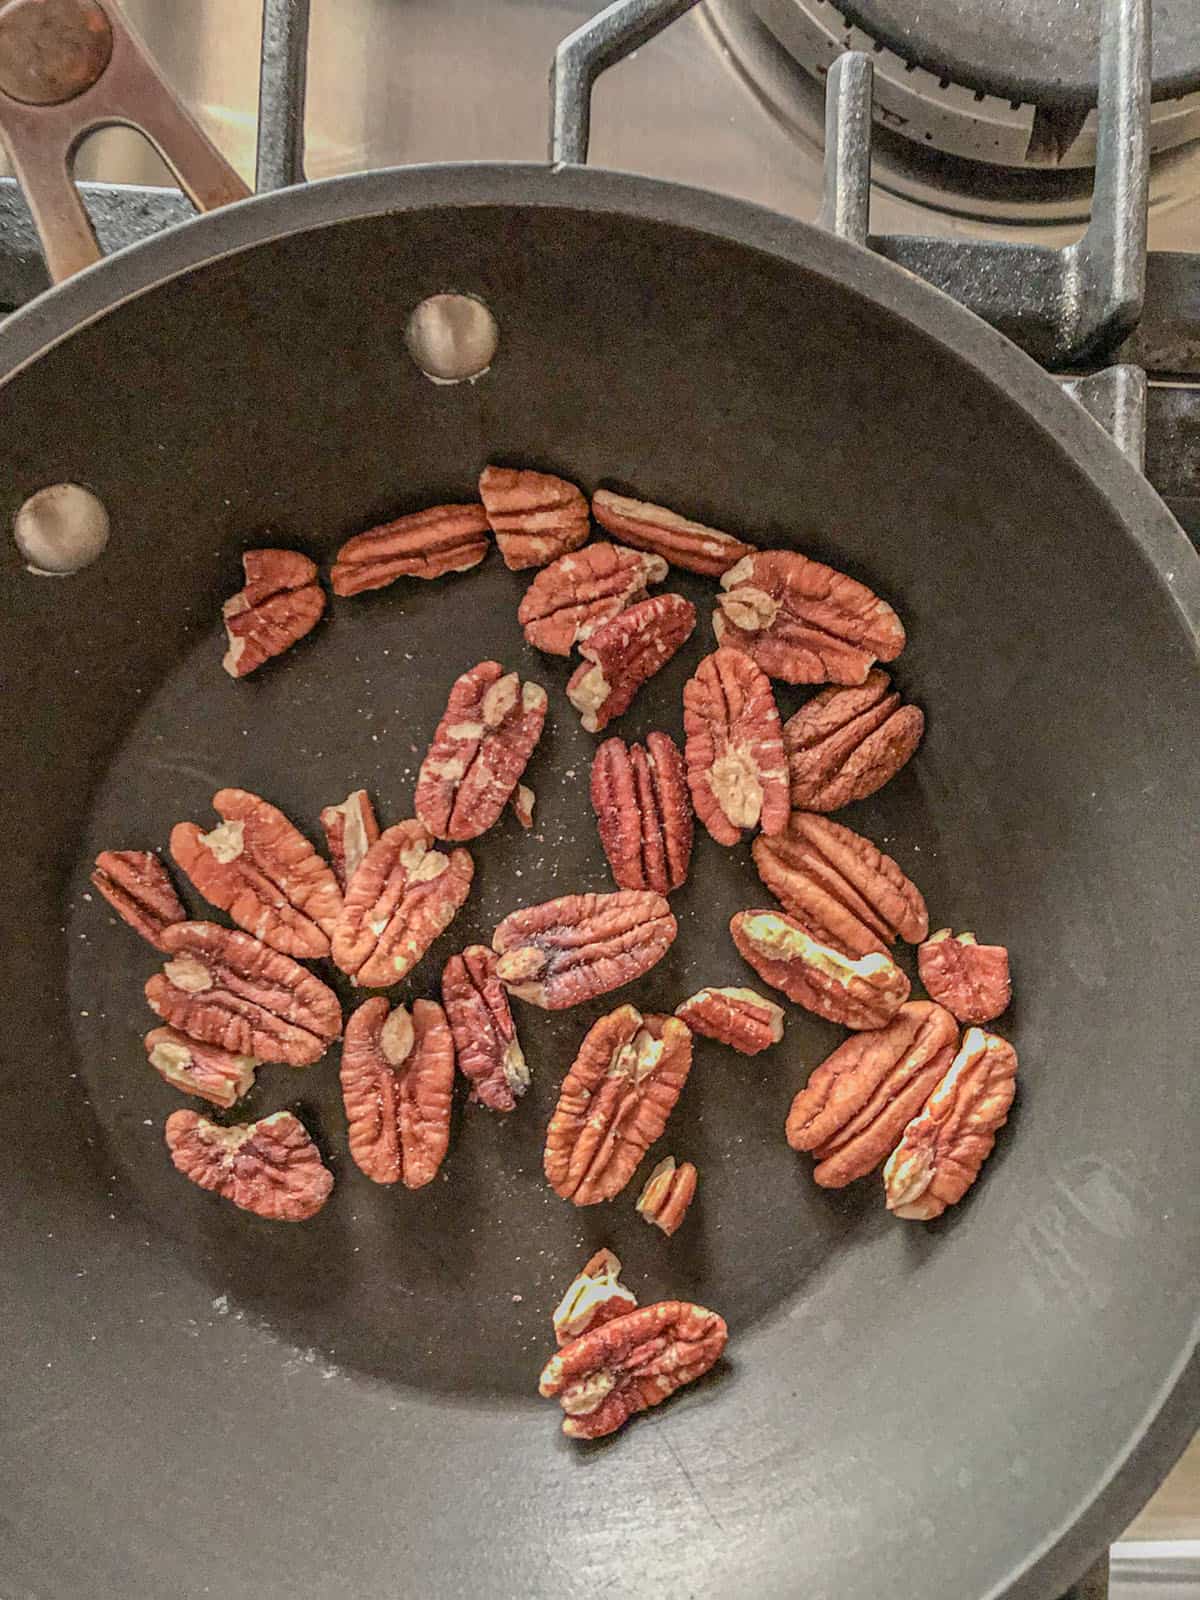 Pecans in a skillet on the stovetop.